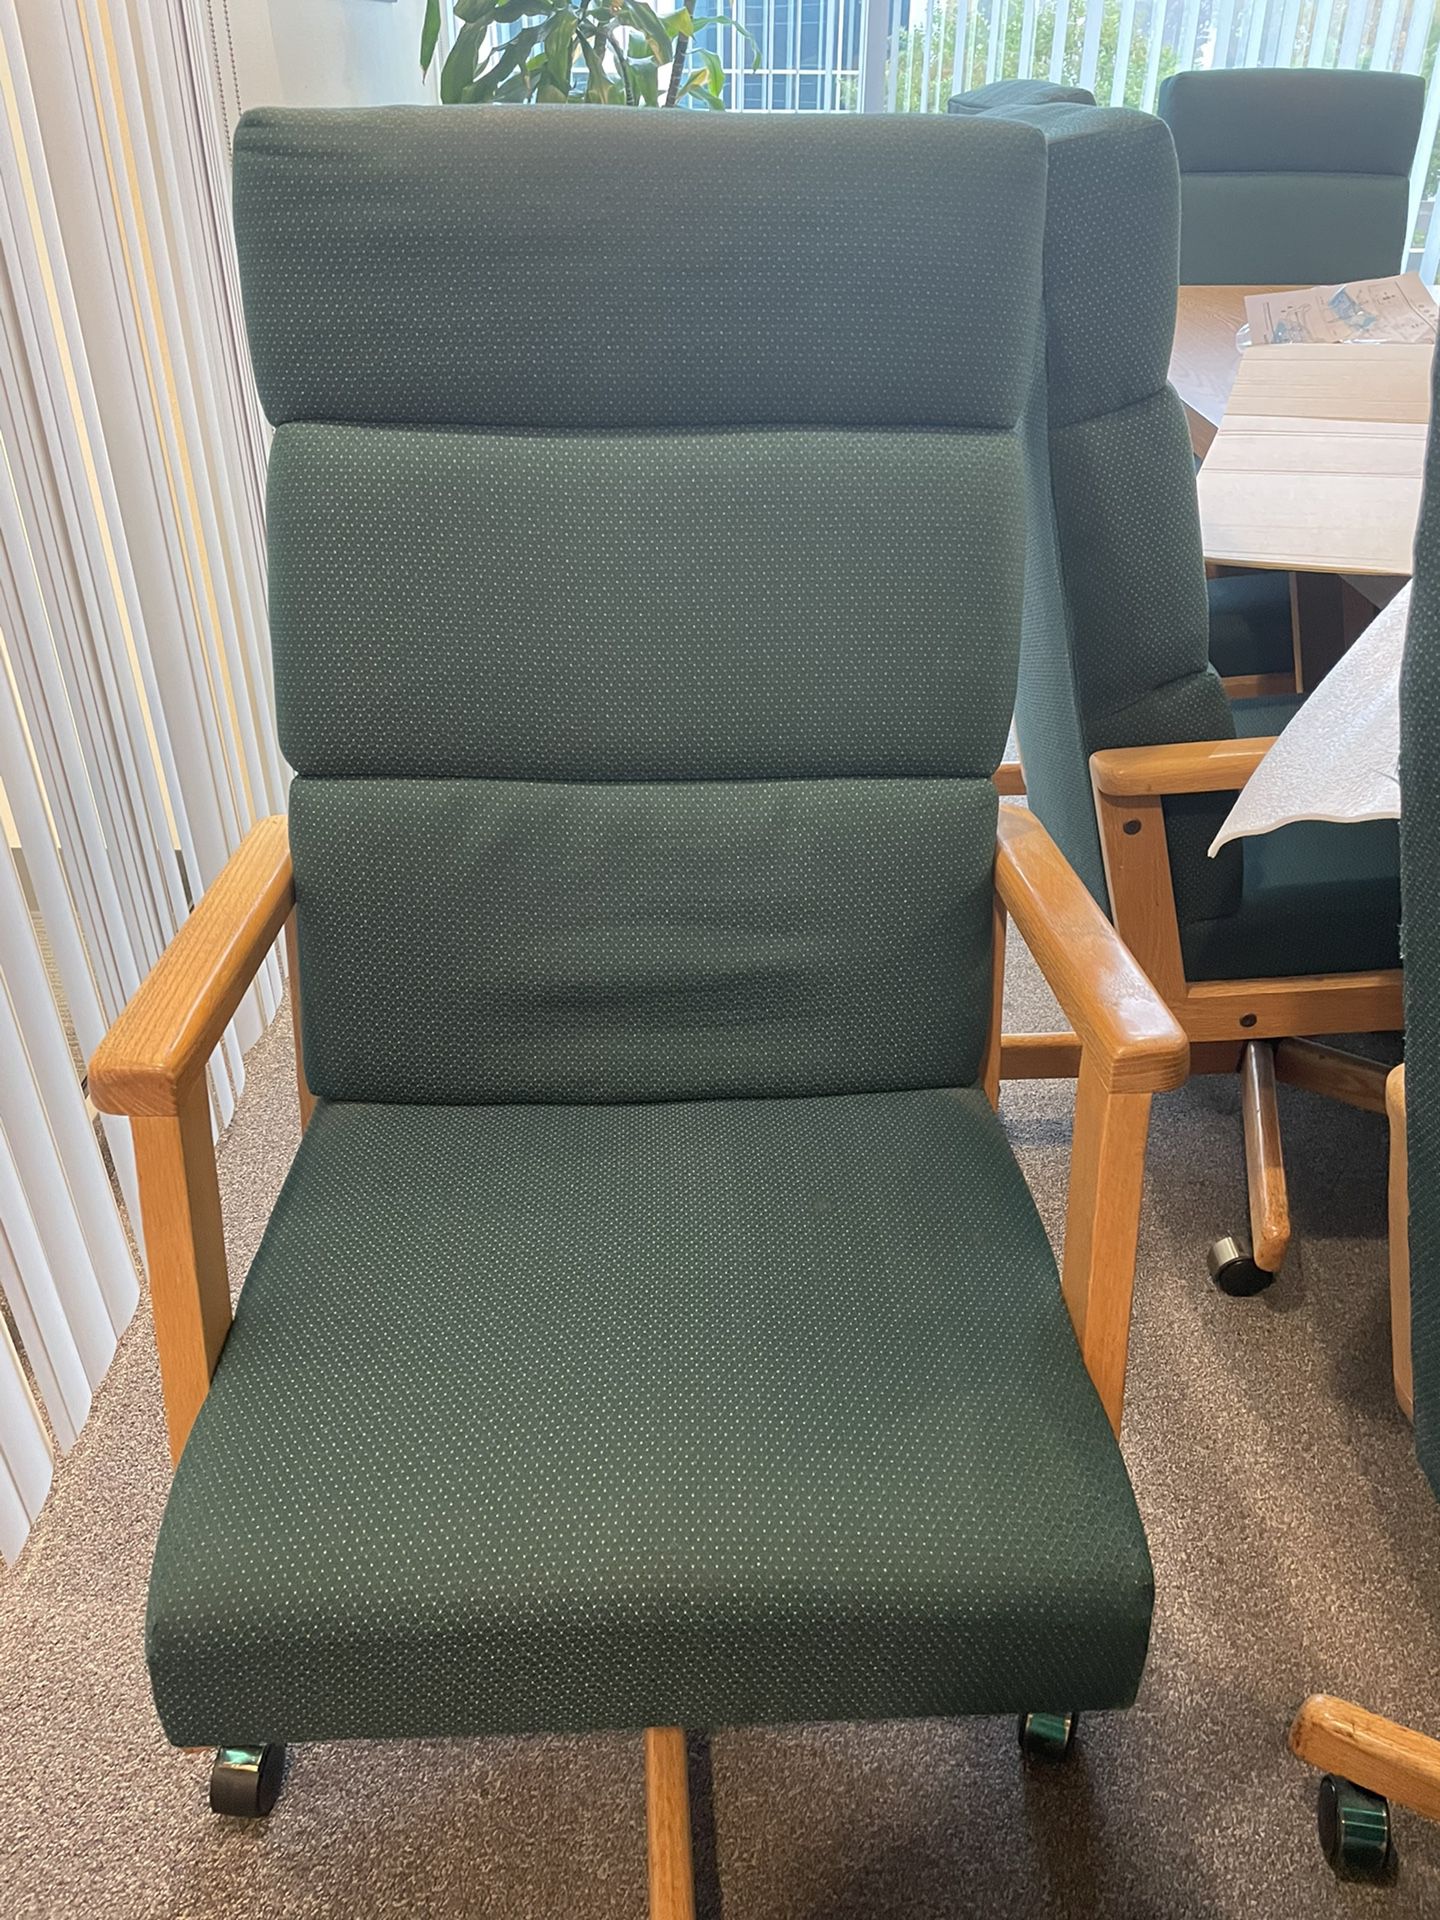 8 High back Conference room Chairs -Green/Brown